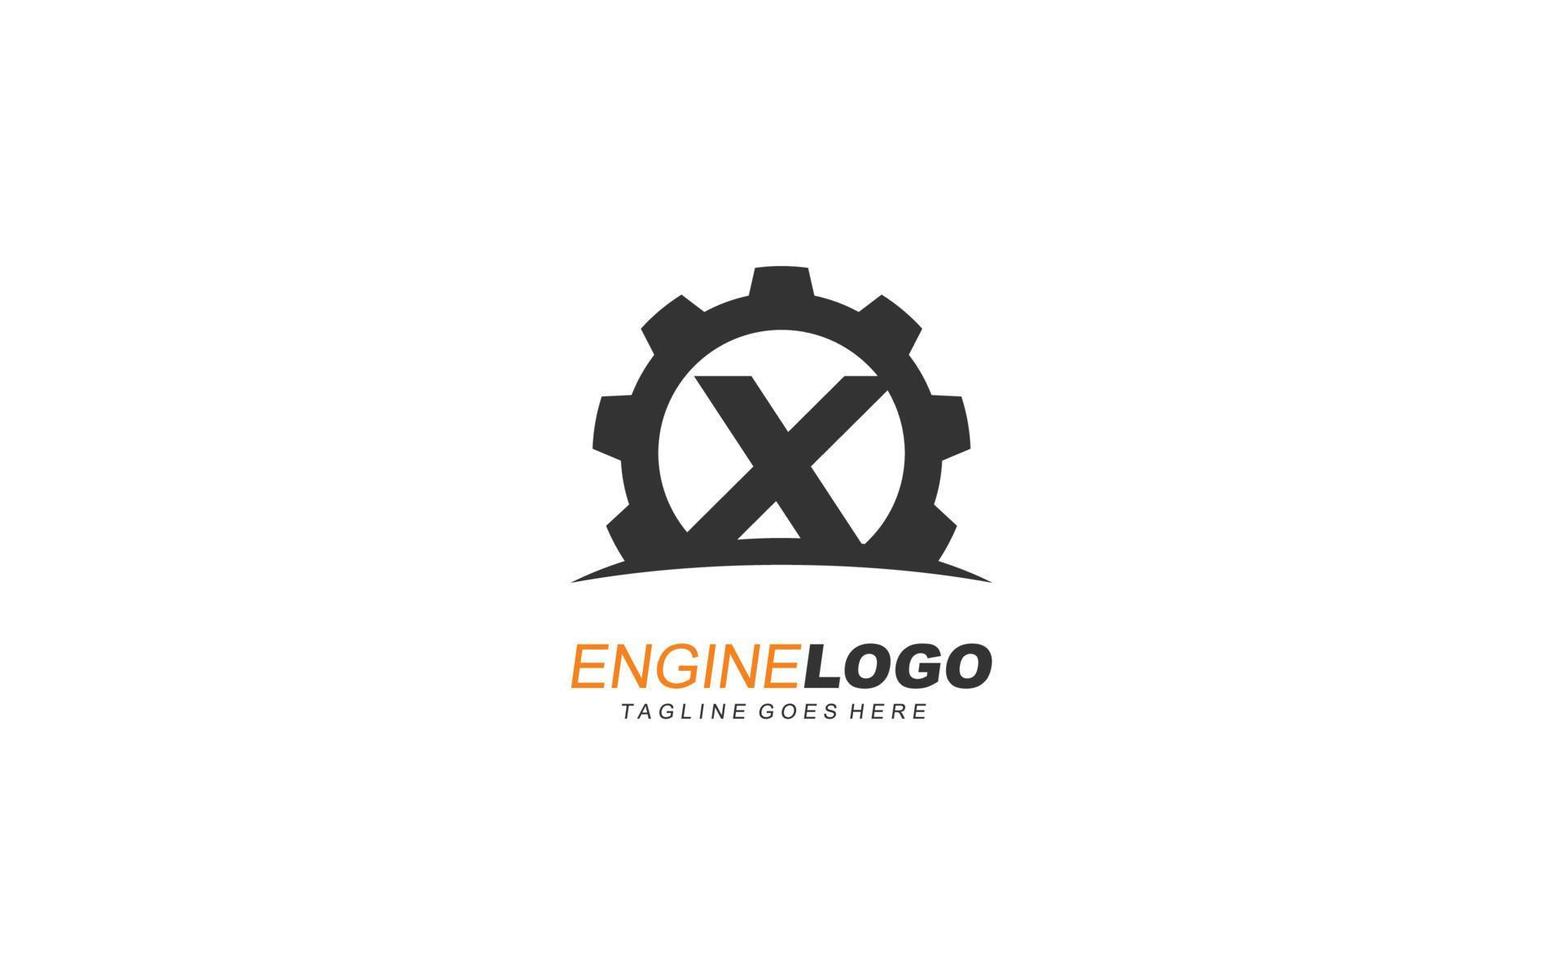 X logo gear for identity. industrial template vector illustration for your brand.